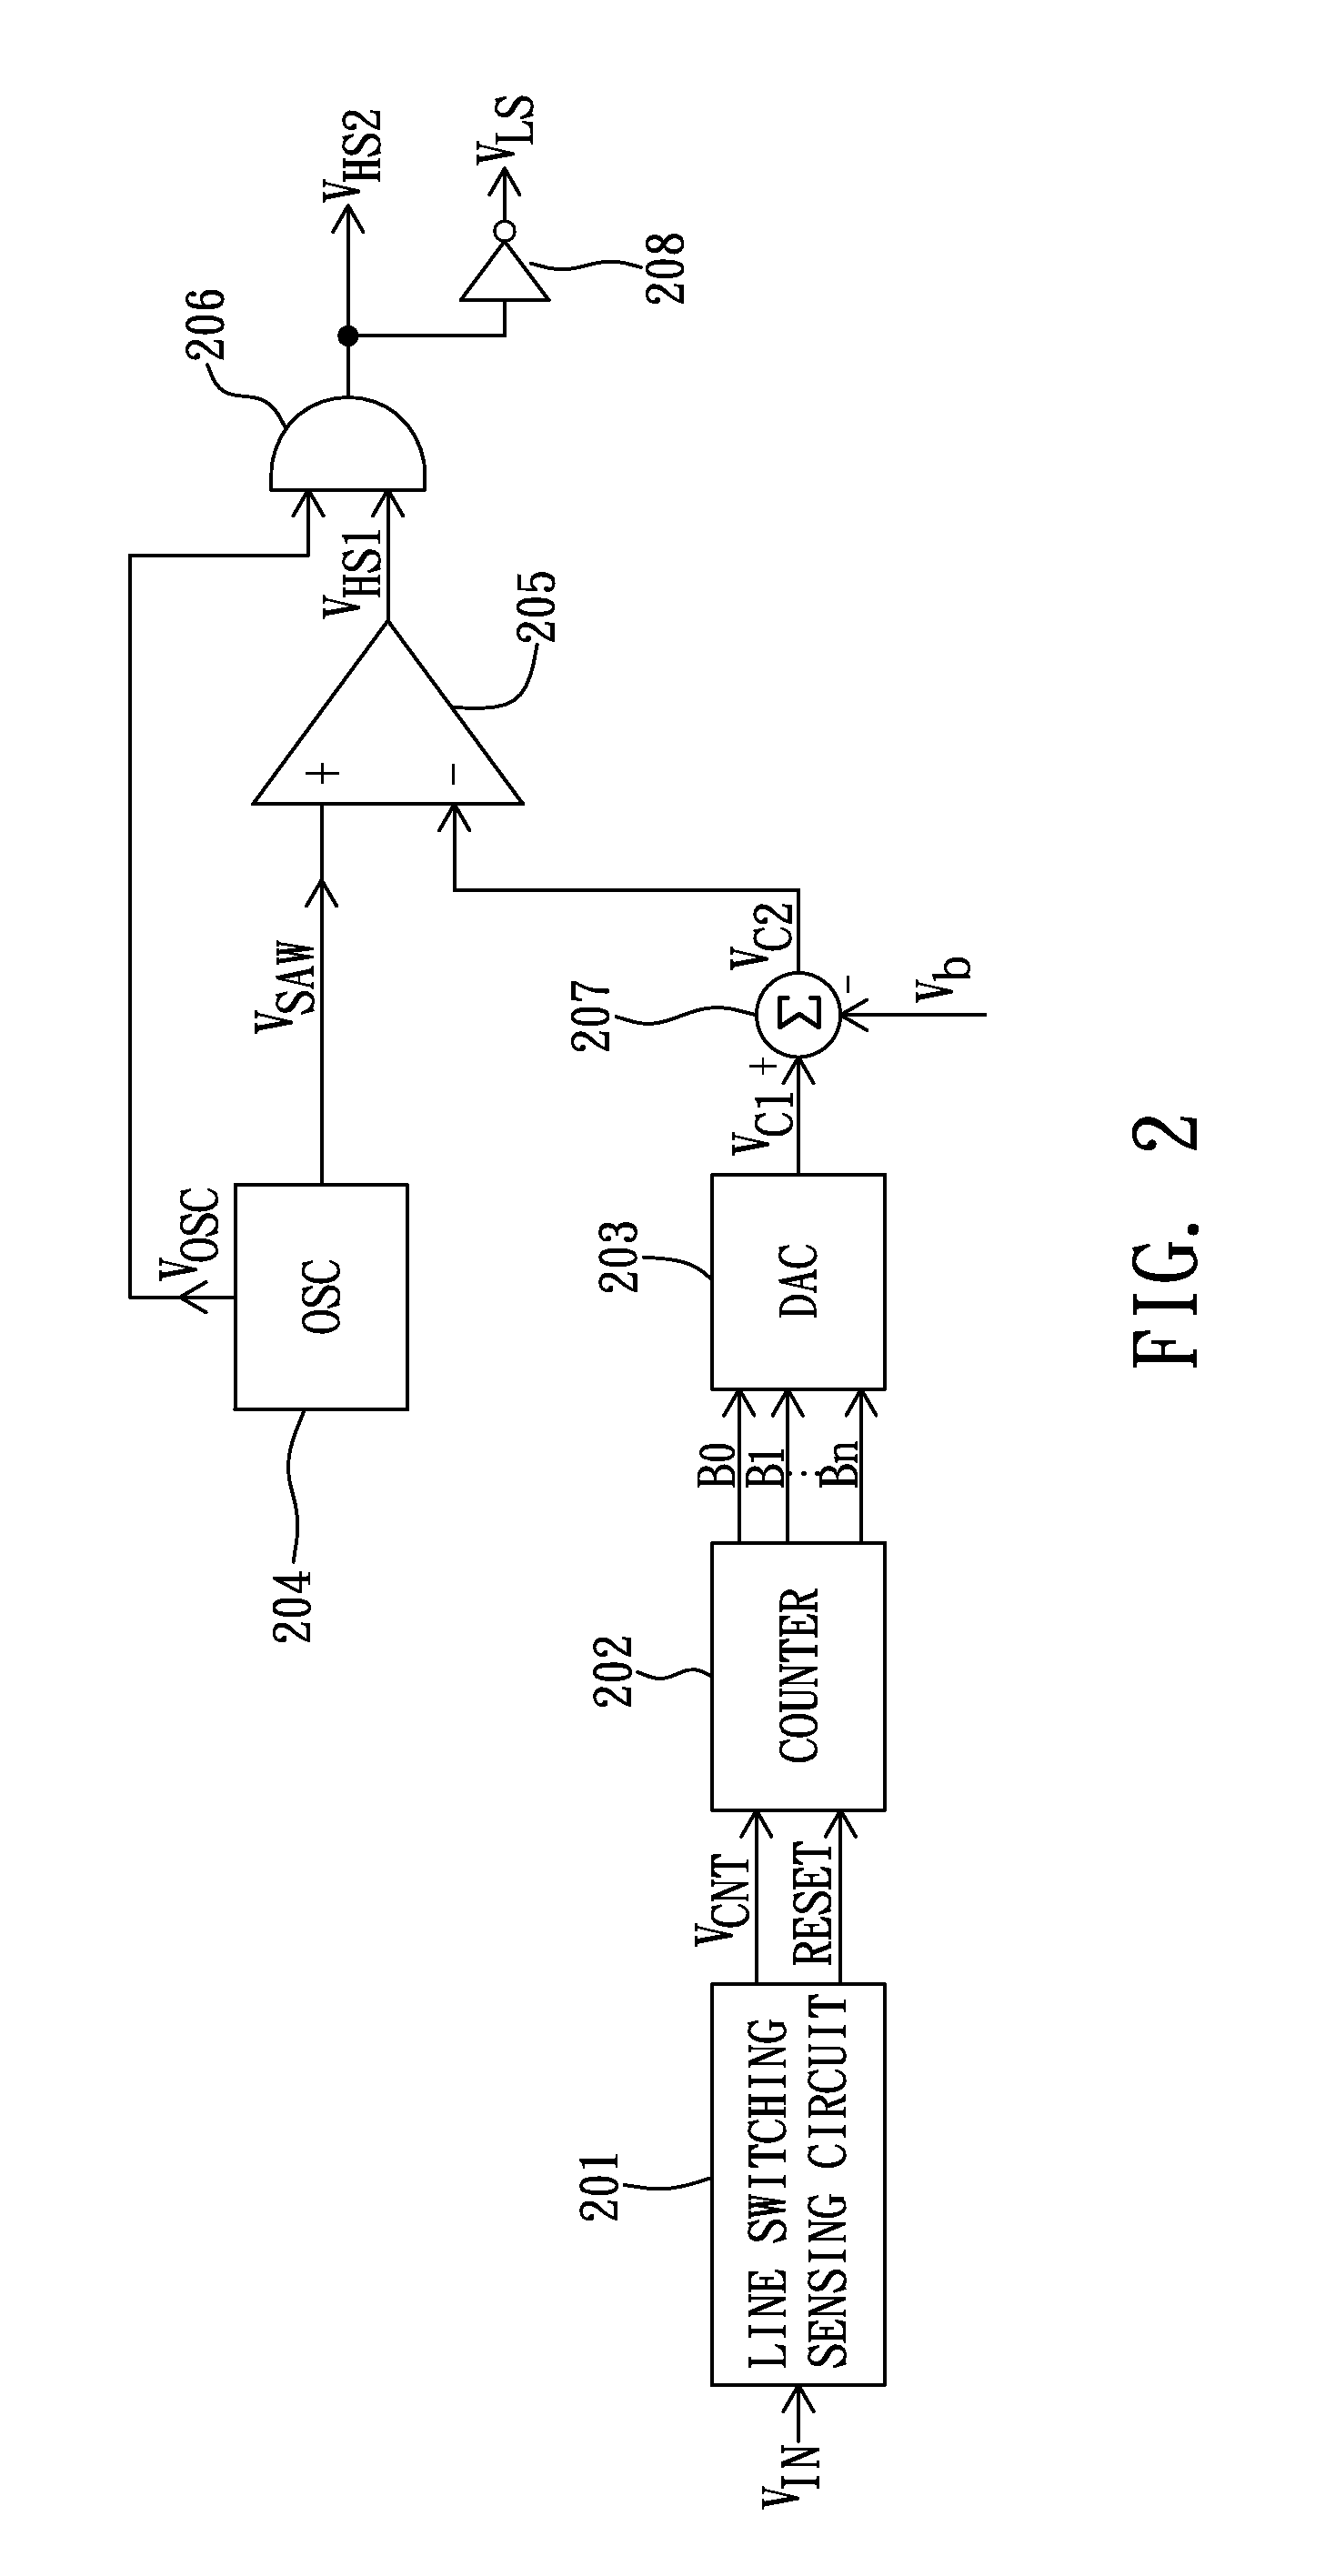 Electronic ballast with dimming control from power line sensing